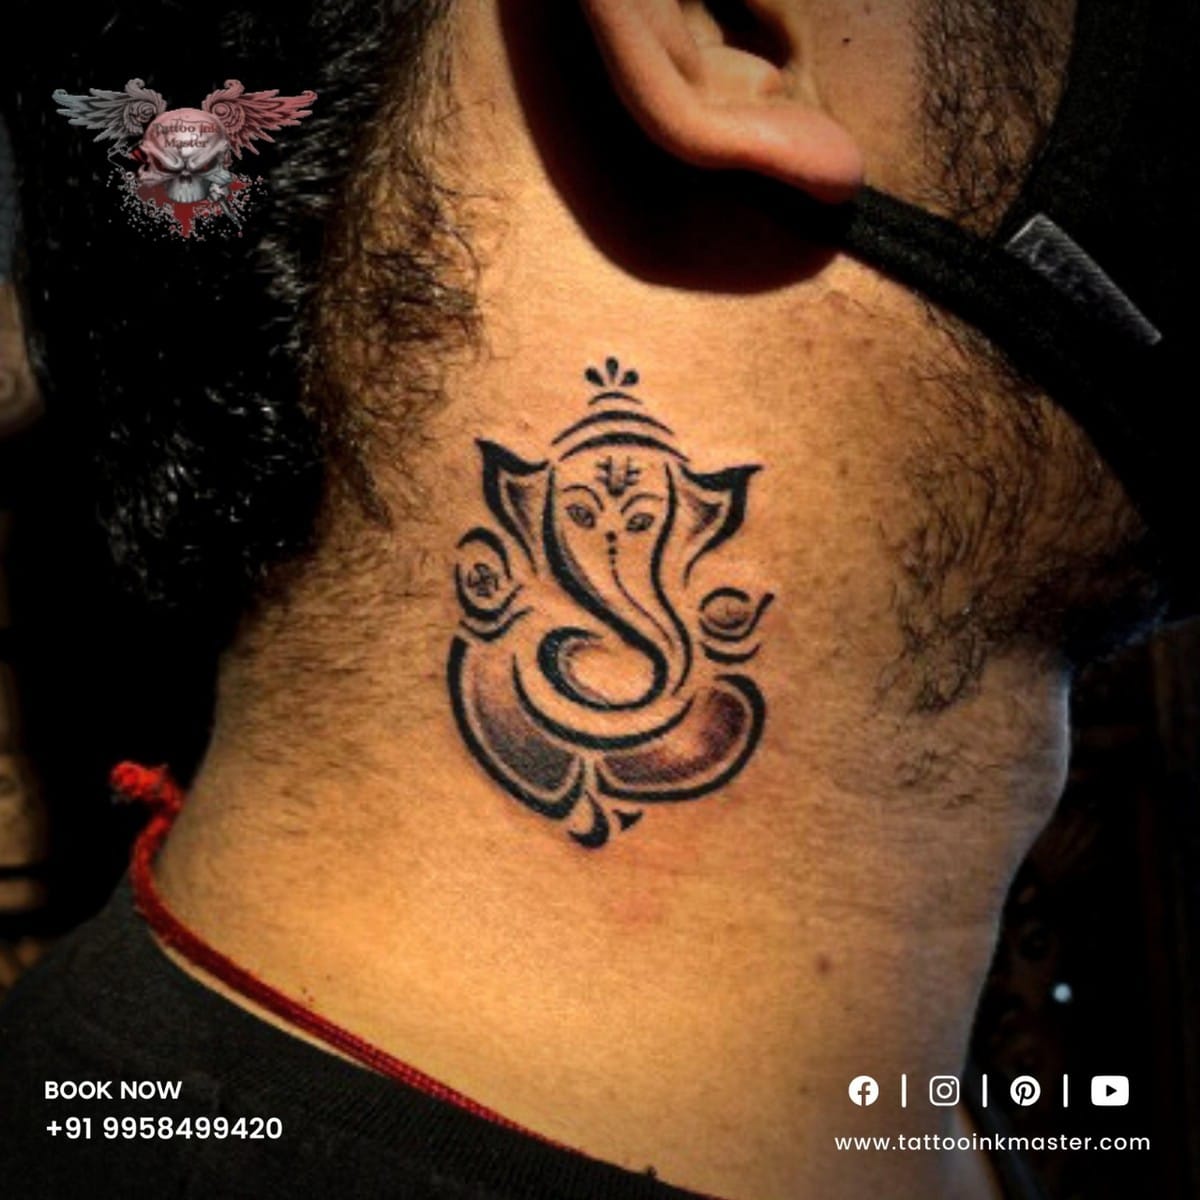 Lord Ganesha Designed With Perfection | Tattoo Ink Master